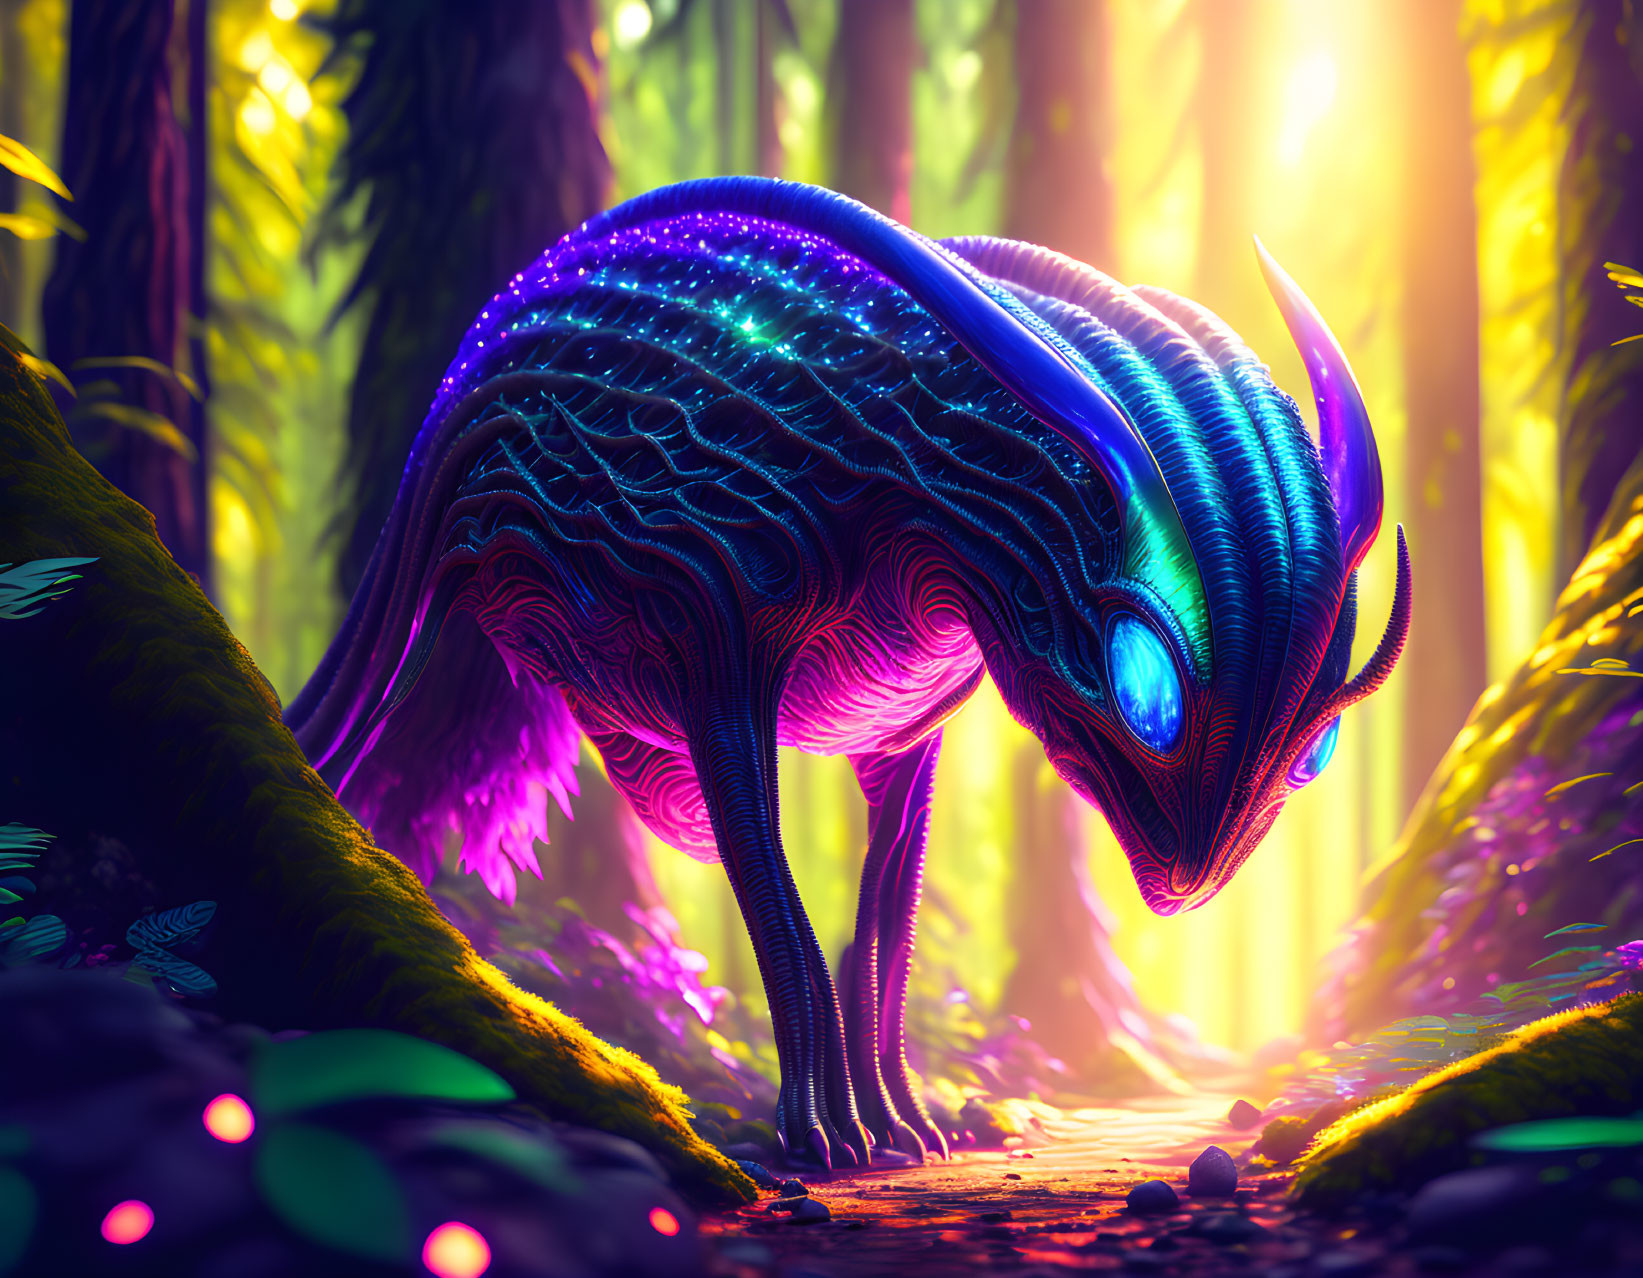 Bioluminescent beetle in enchanted forest with neon exoskeleton